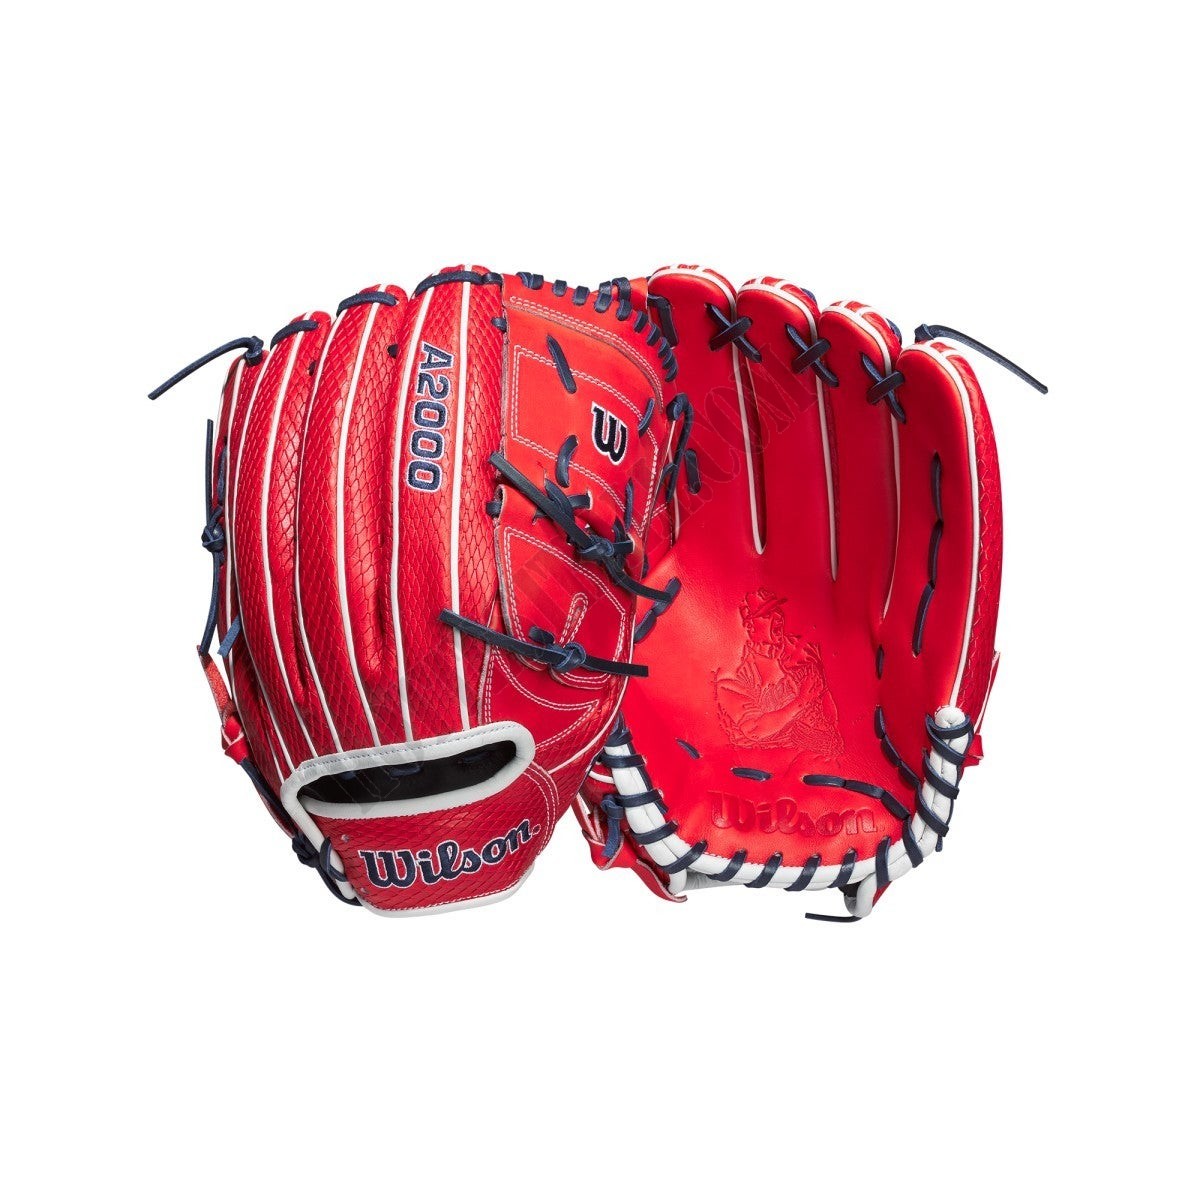 2021 A2000 B125 12.5" Carlos Carrasco Game Model Pitcher's Baseball Glove ● Wilson Promotions - -0